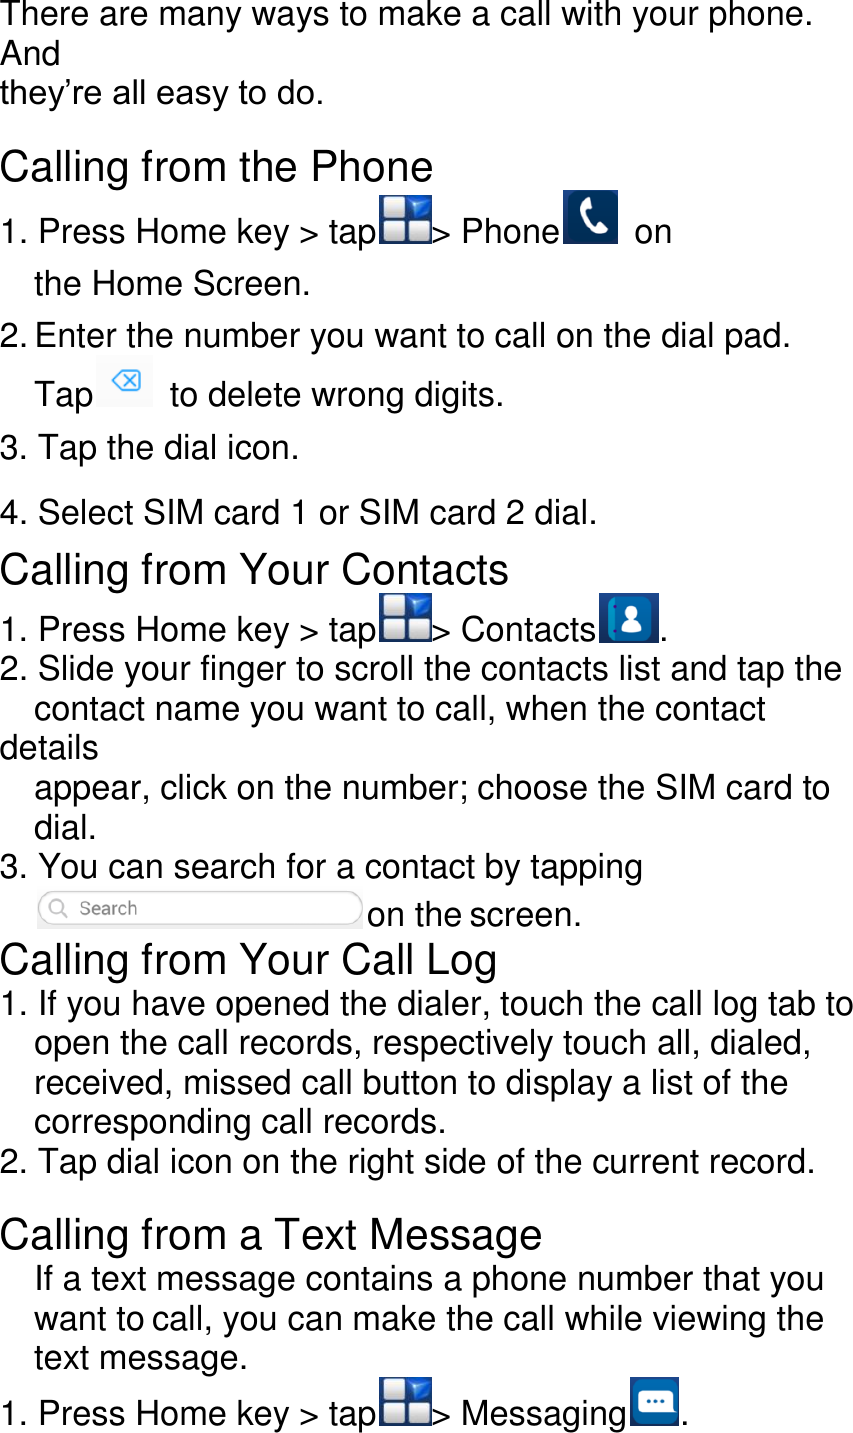 There are many ways to make a call with your phone. And they’re all easy to do.  Calling from the Phone 1. Press Home key &gt; tap &gt; Phone   on the Home Screen. 2. Enter the number you want to call on the dial pad. Tap   to delete wrong digits. 3. Tap the dial icon. 4. Select SIM card 1 or SIM card 2 dial. Calling from Your Contacts 1. Press Home key &gt; tap &gt; Contacts . 2. Slide your finger to scroll the contacts list and tap the   contact name you want to call, when the contact details   appear, click on the number; choose the SIM card to   dial. 3. You can search for a contact by tapping  on the screen. Calling from Your Call Log 1. If you have opened the dialer, touch the call log tab to   open the call records, respectively touch all, dialed,   received, missed call button to display a list of the   corresponding call records. 2. Tap dial icon on the right side of the current record.  Calling from a Text Message If a text message contains a phone number that you want to call, you can make the call while viewing the text message. 1. Press Home key &gt; tap &gt; Messaging . 